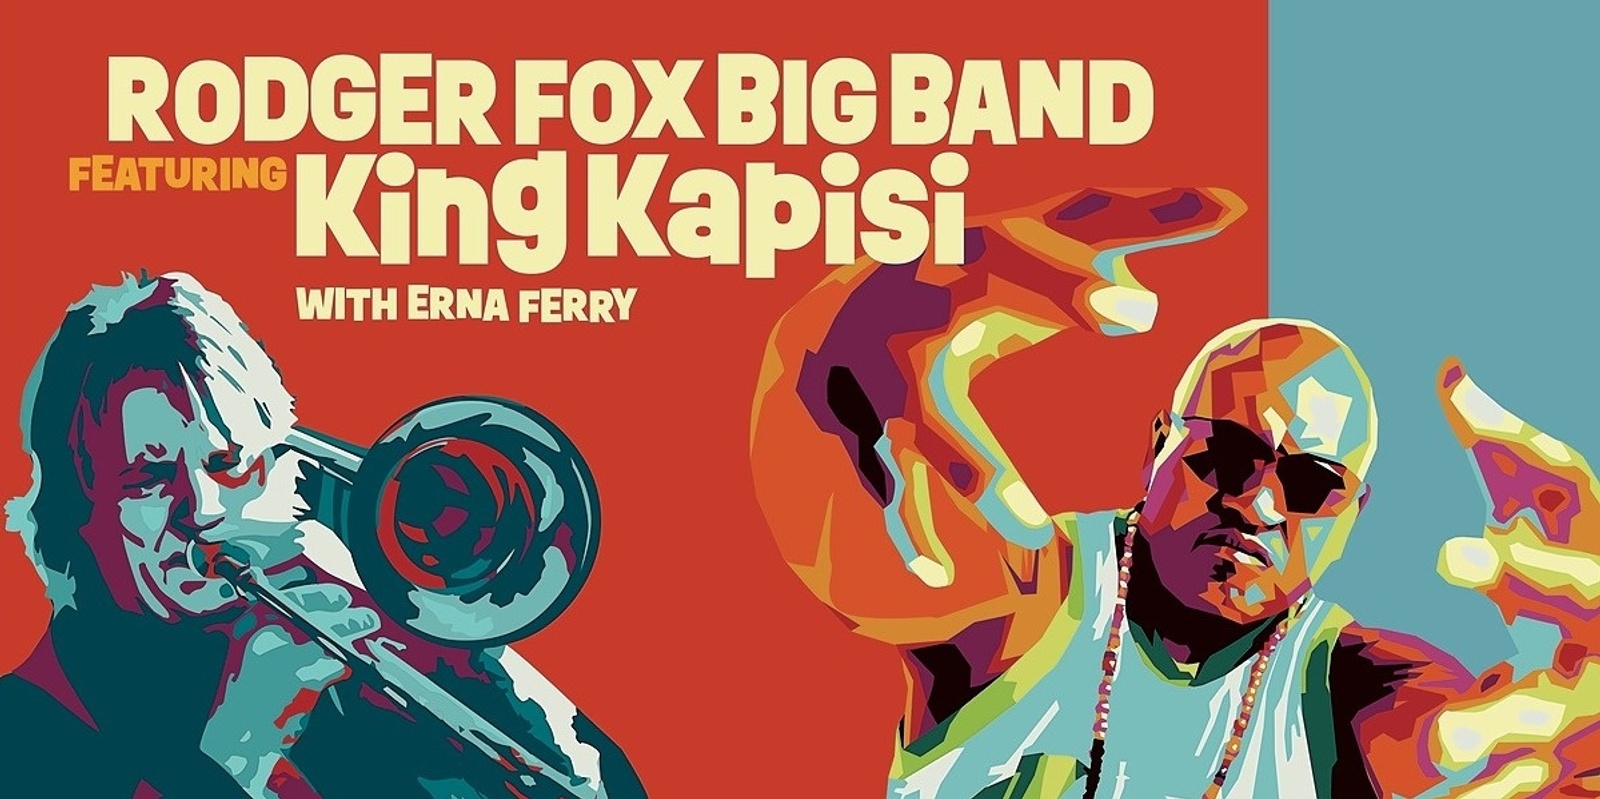 Banner image for The Rodger Fox Big Band featuring King Kapisi with Erna Ferry